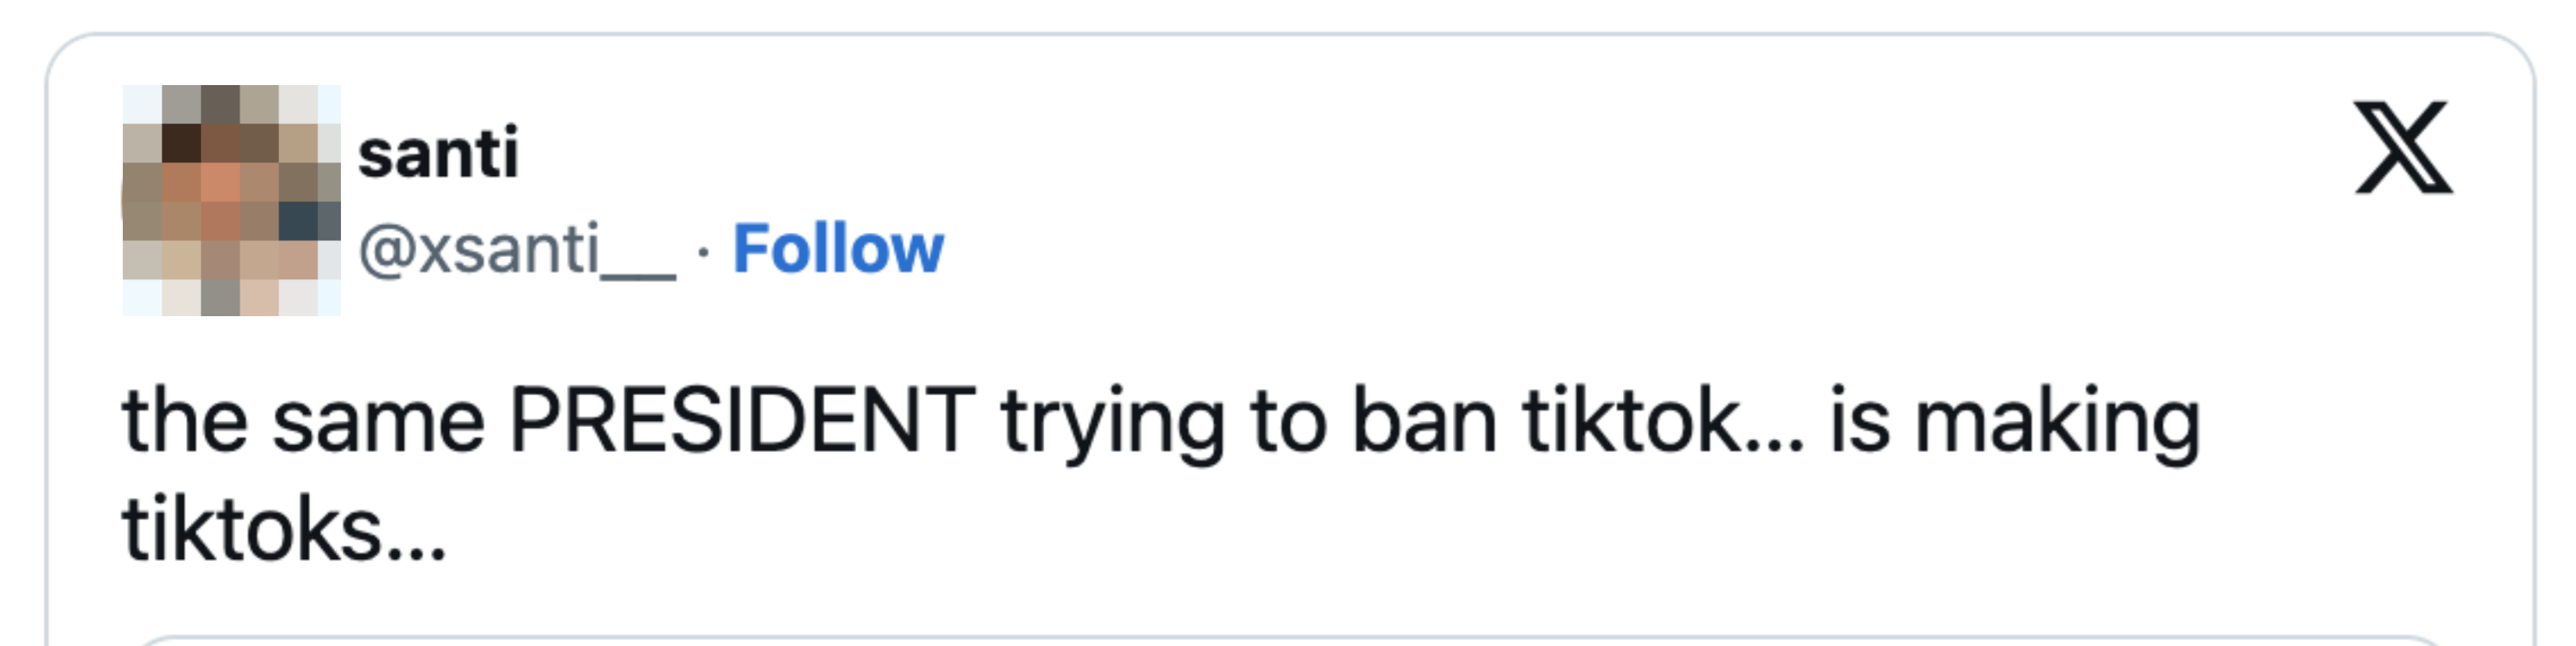 Tweet expressing irony about a president trying to ban TikTok while also using it